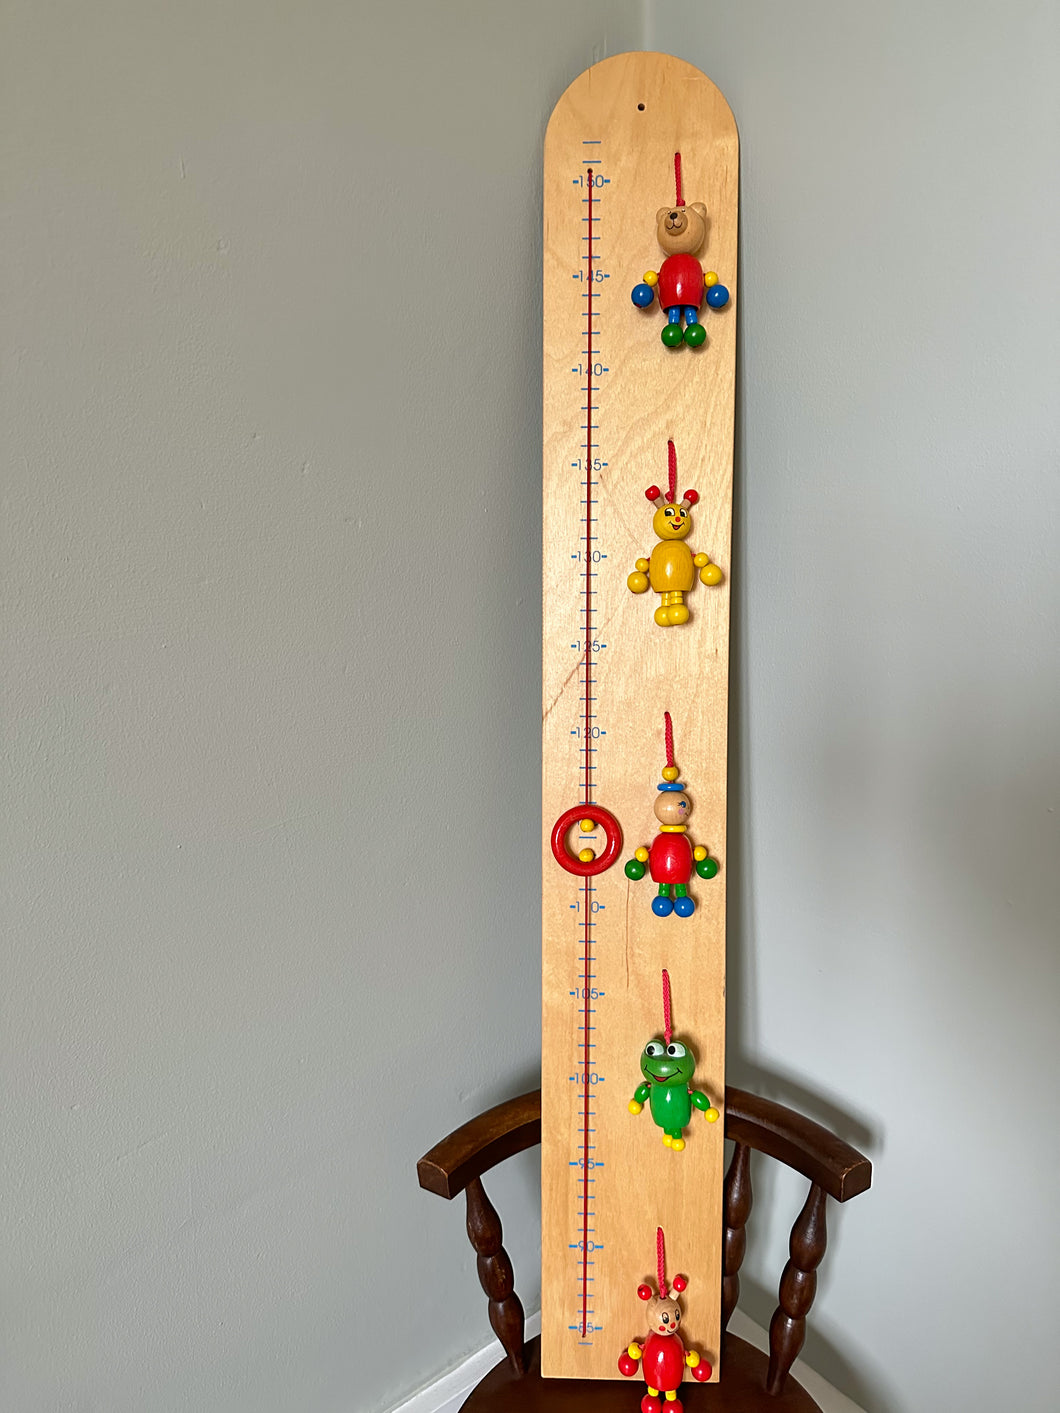 Vintage German beaded character height chart / growth chart / measuring stick, featuring teddy, bugs, frog - Moppet